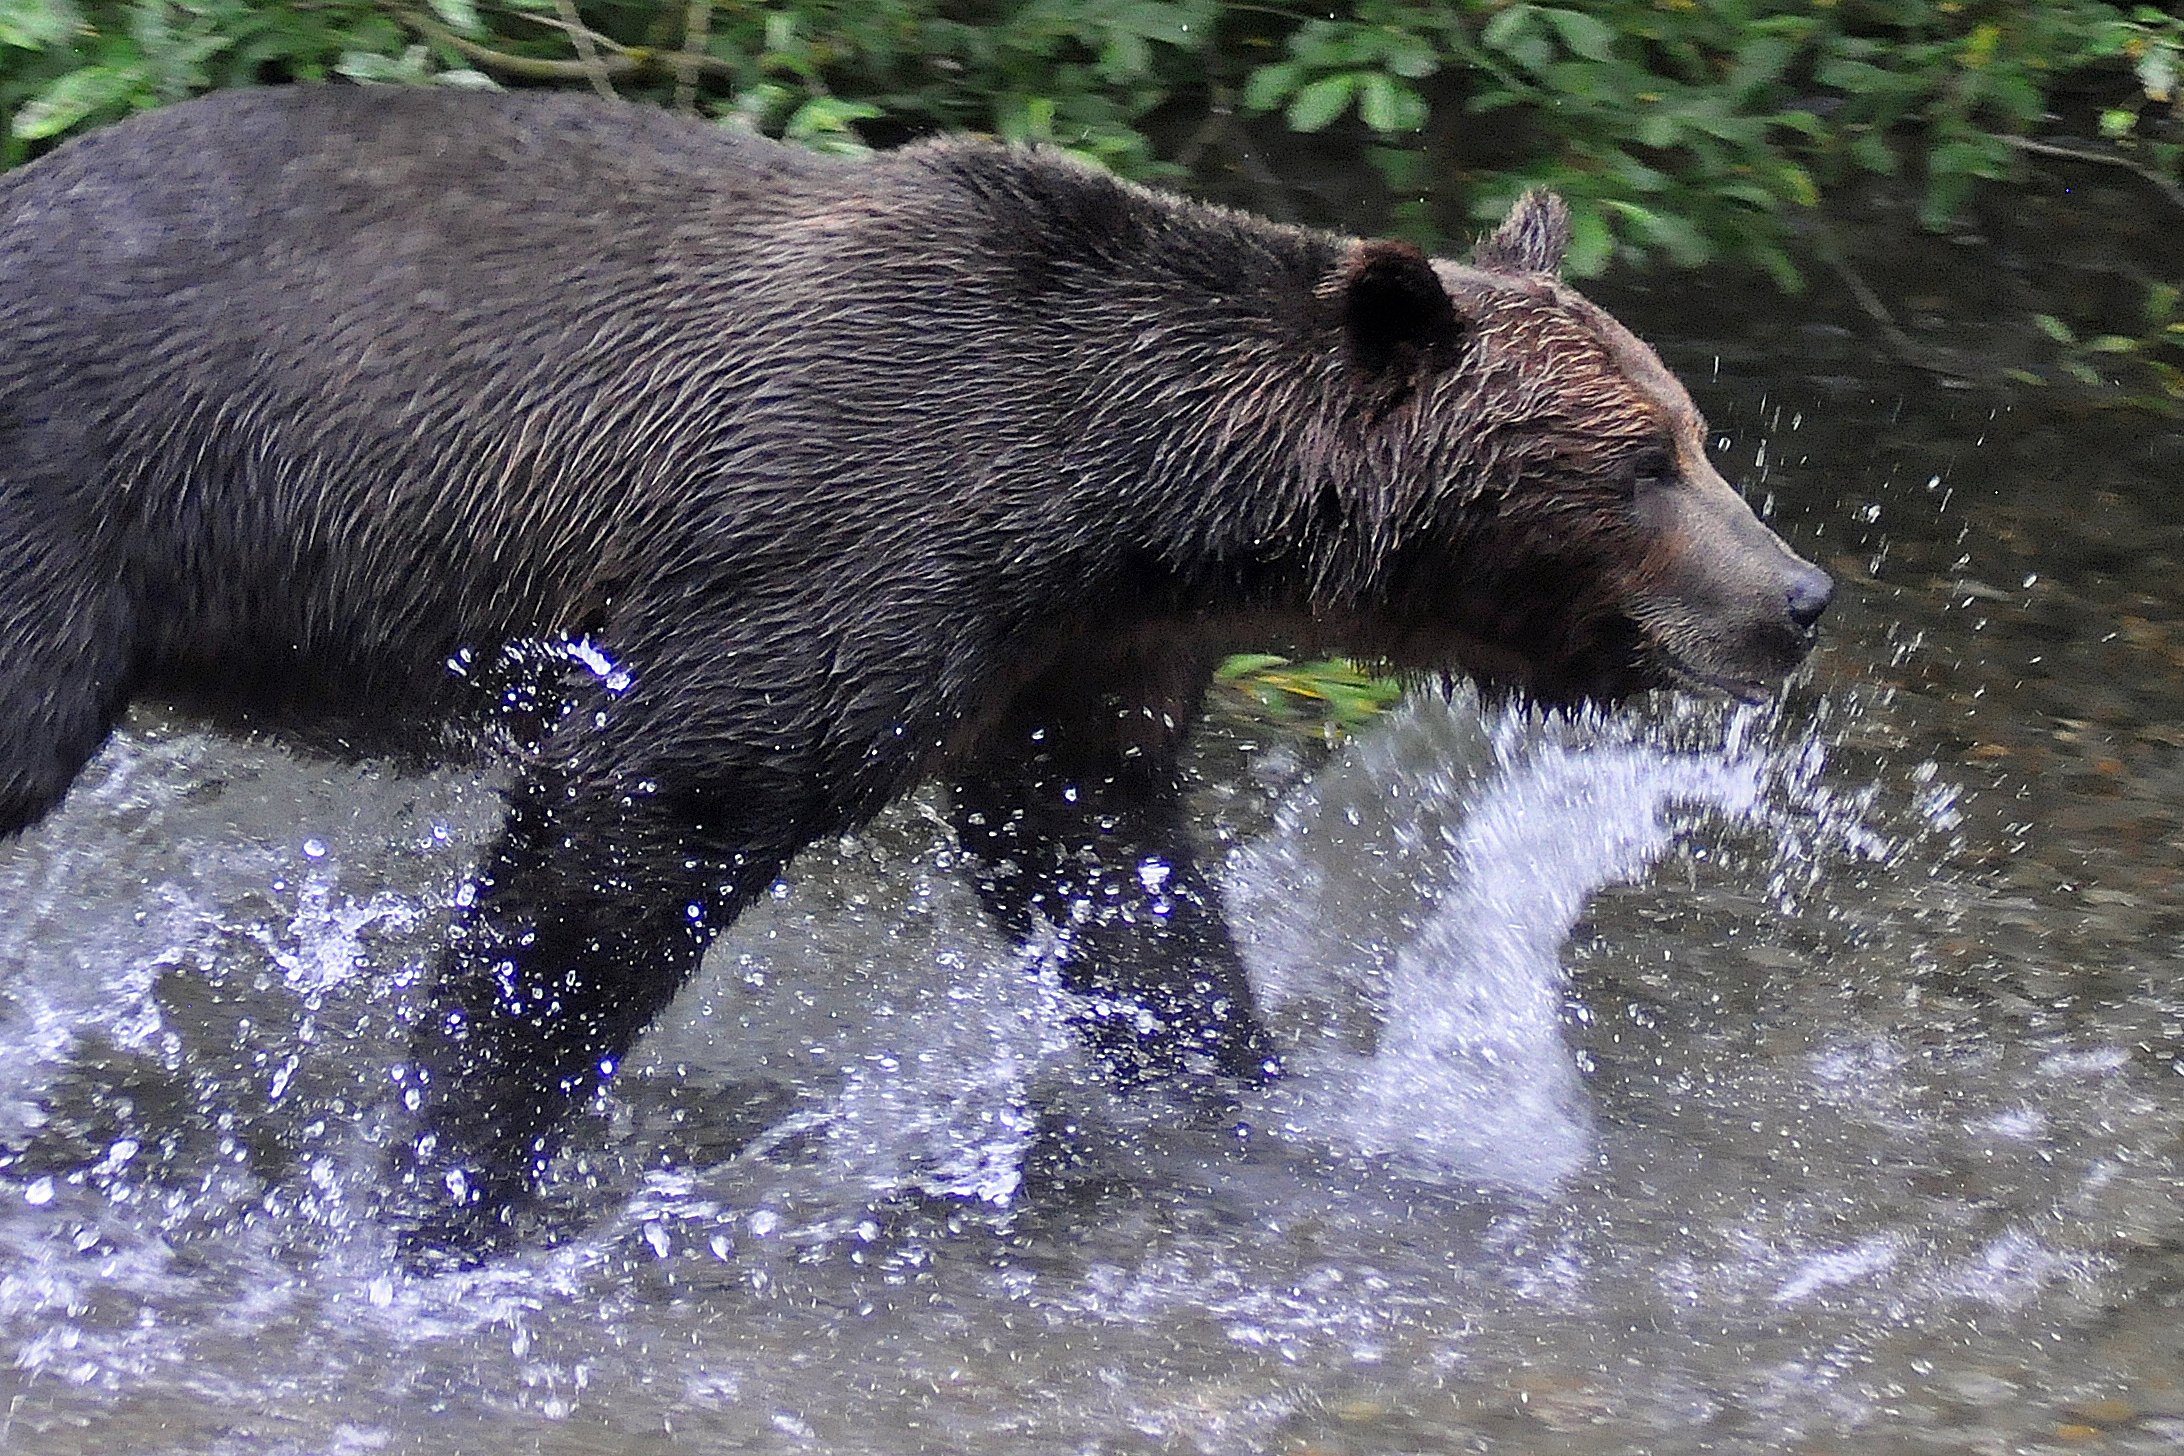  A grizzly fishes for salmon in Fish Creek near Hyder, AK. 